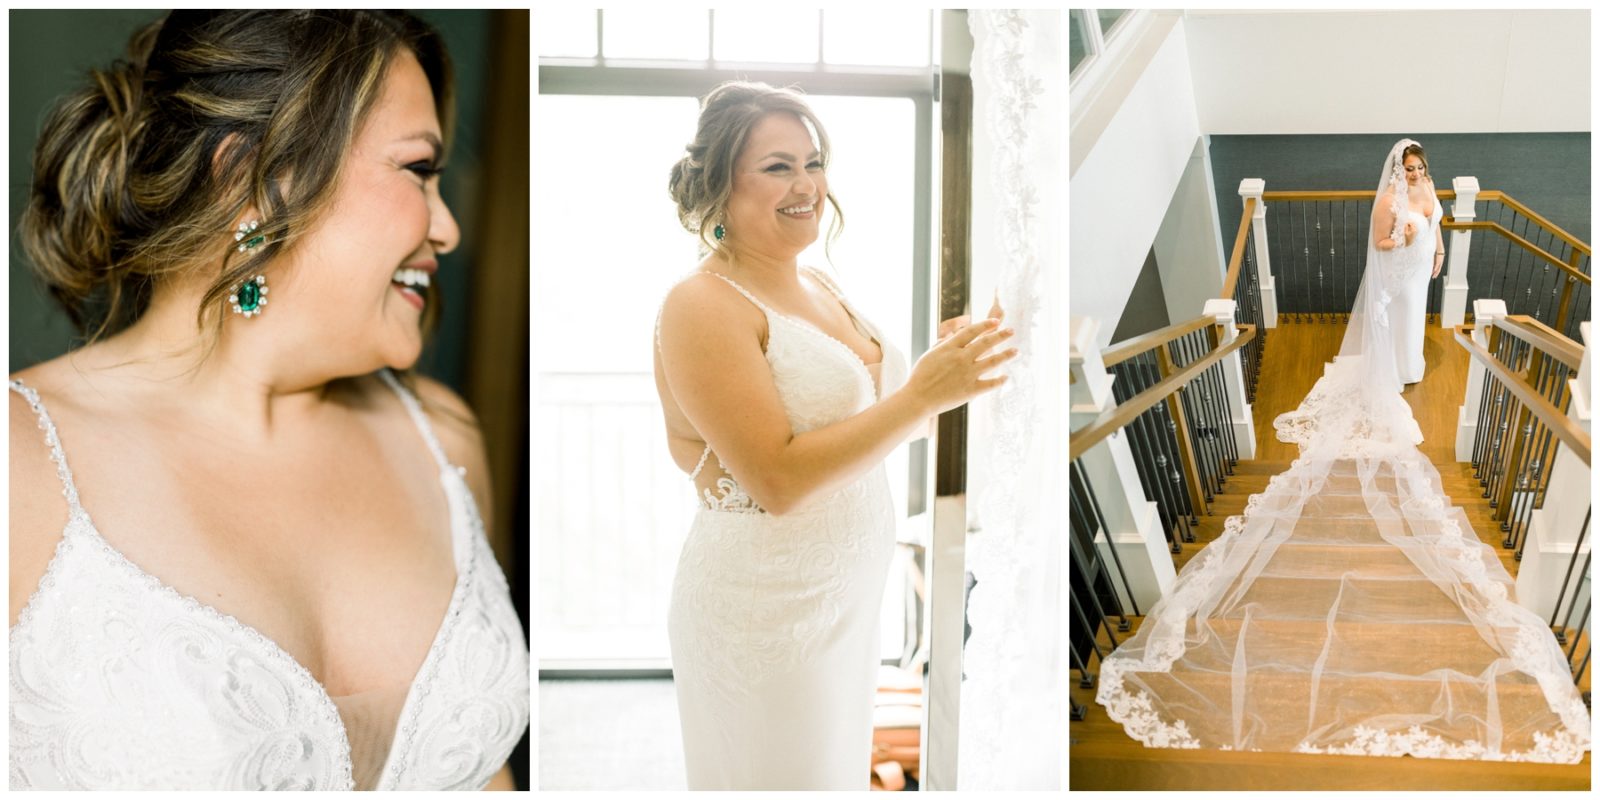 Pictures of a bride.